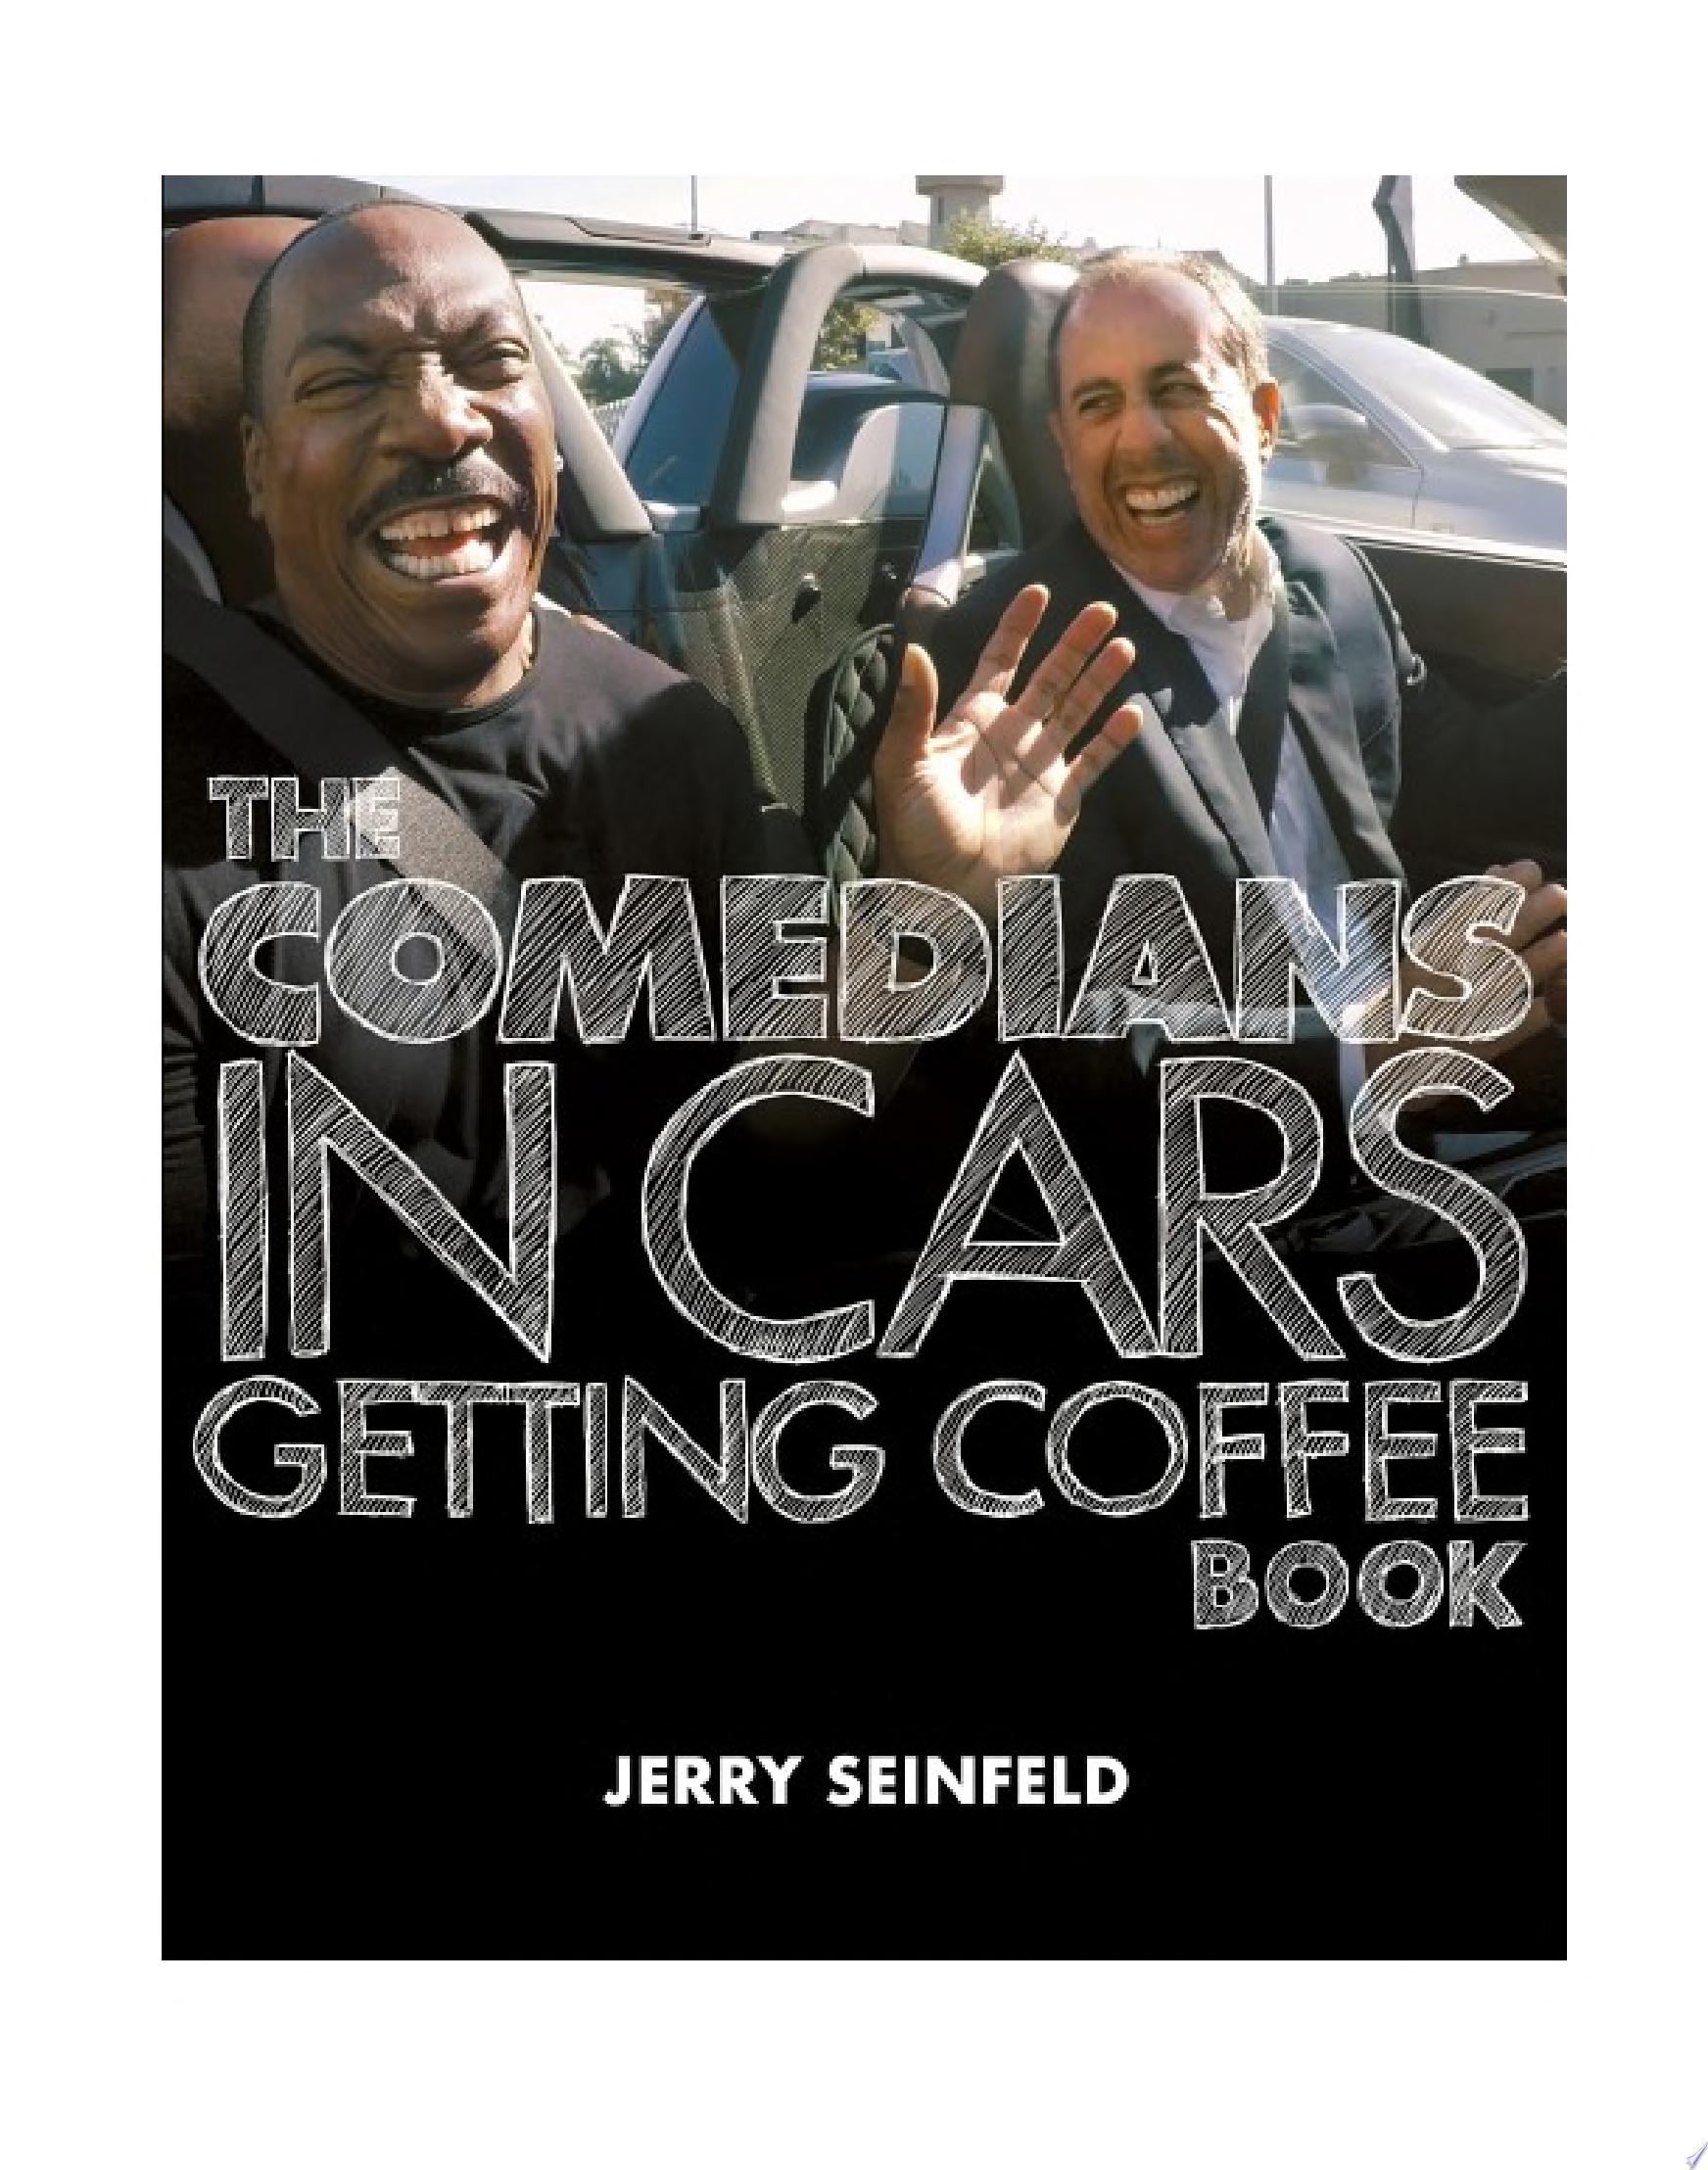 Image for "The Comedians in Cars Getting Coffee Book"